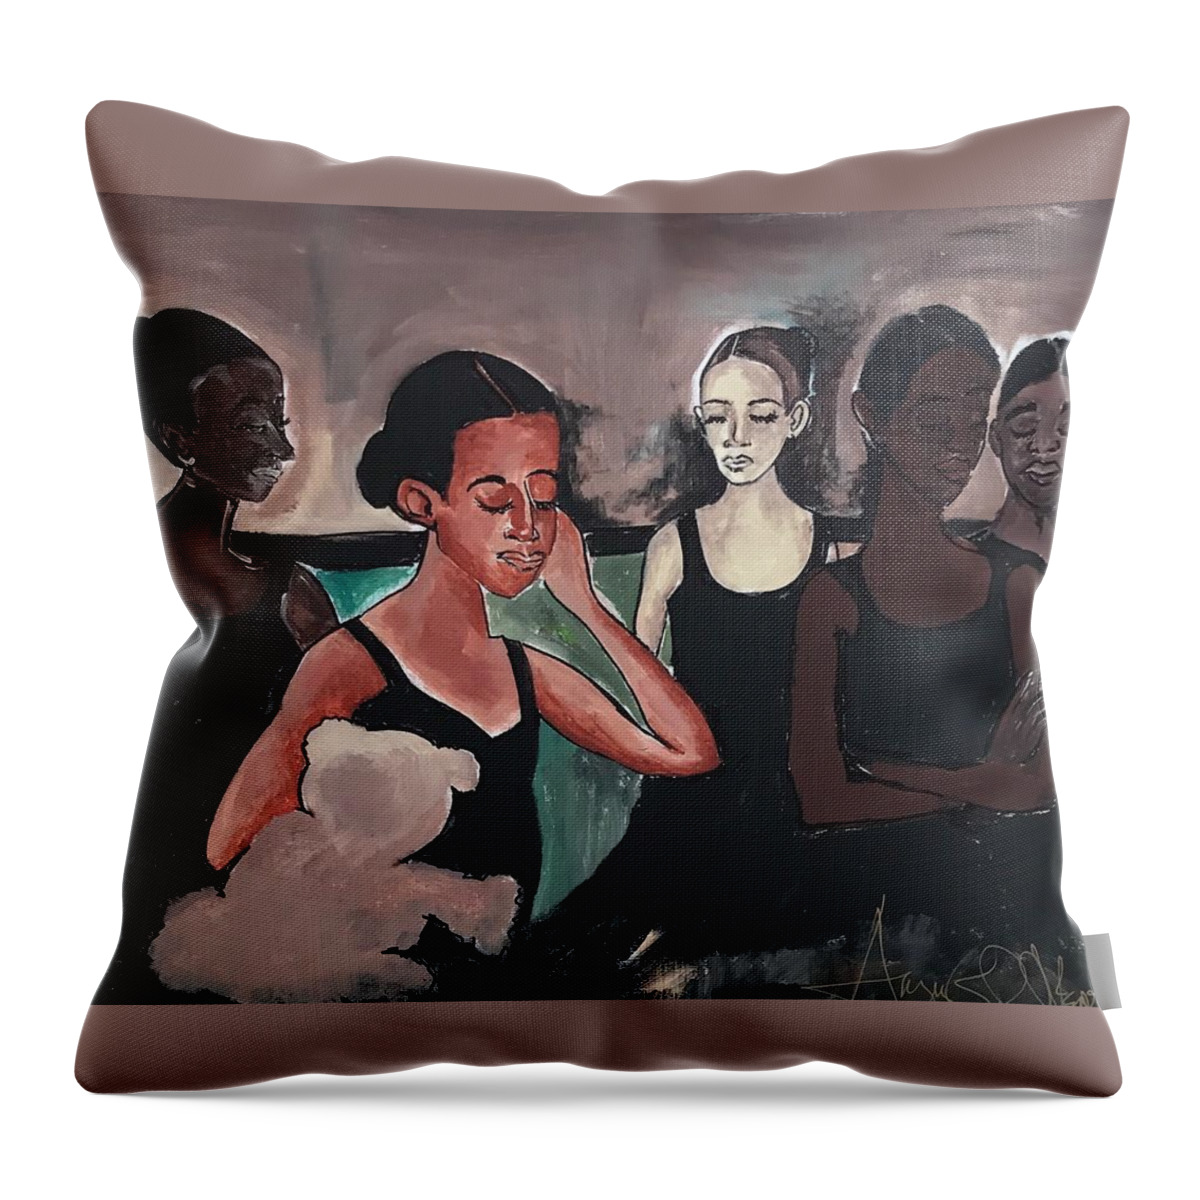  Throw Pillow featuring the painting Backstage by Angie ONeal